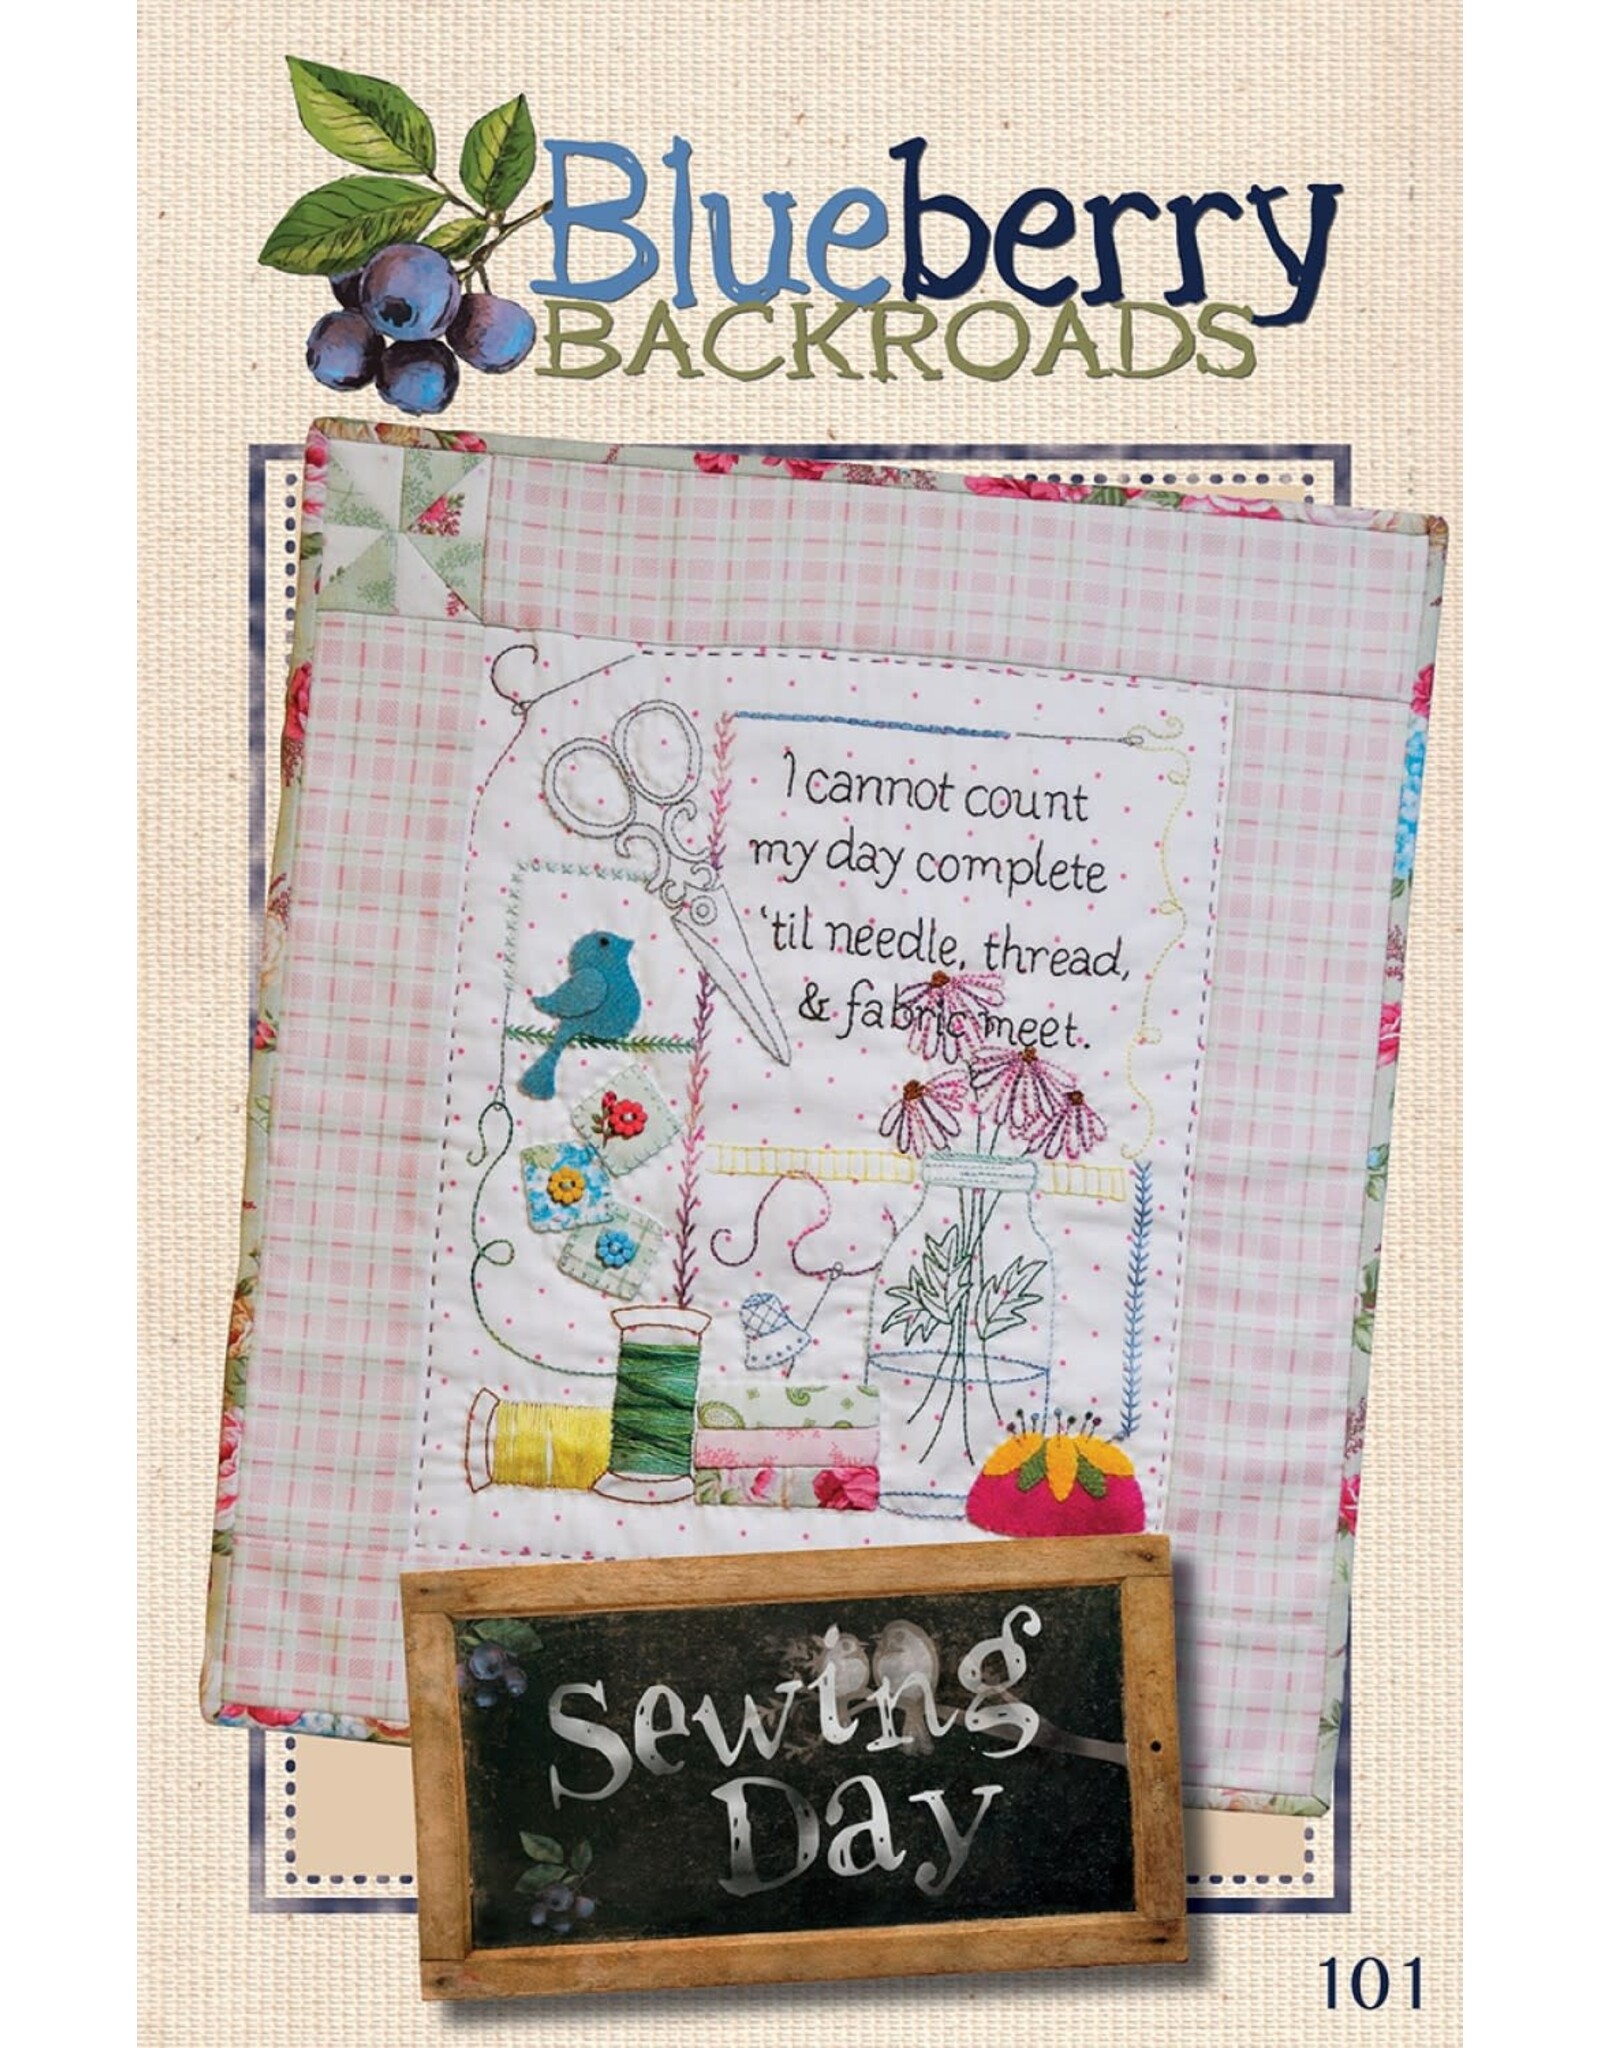 Blueberry Backroads Sewing Day - embroidery pattern